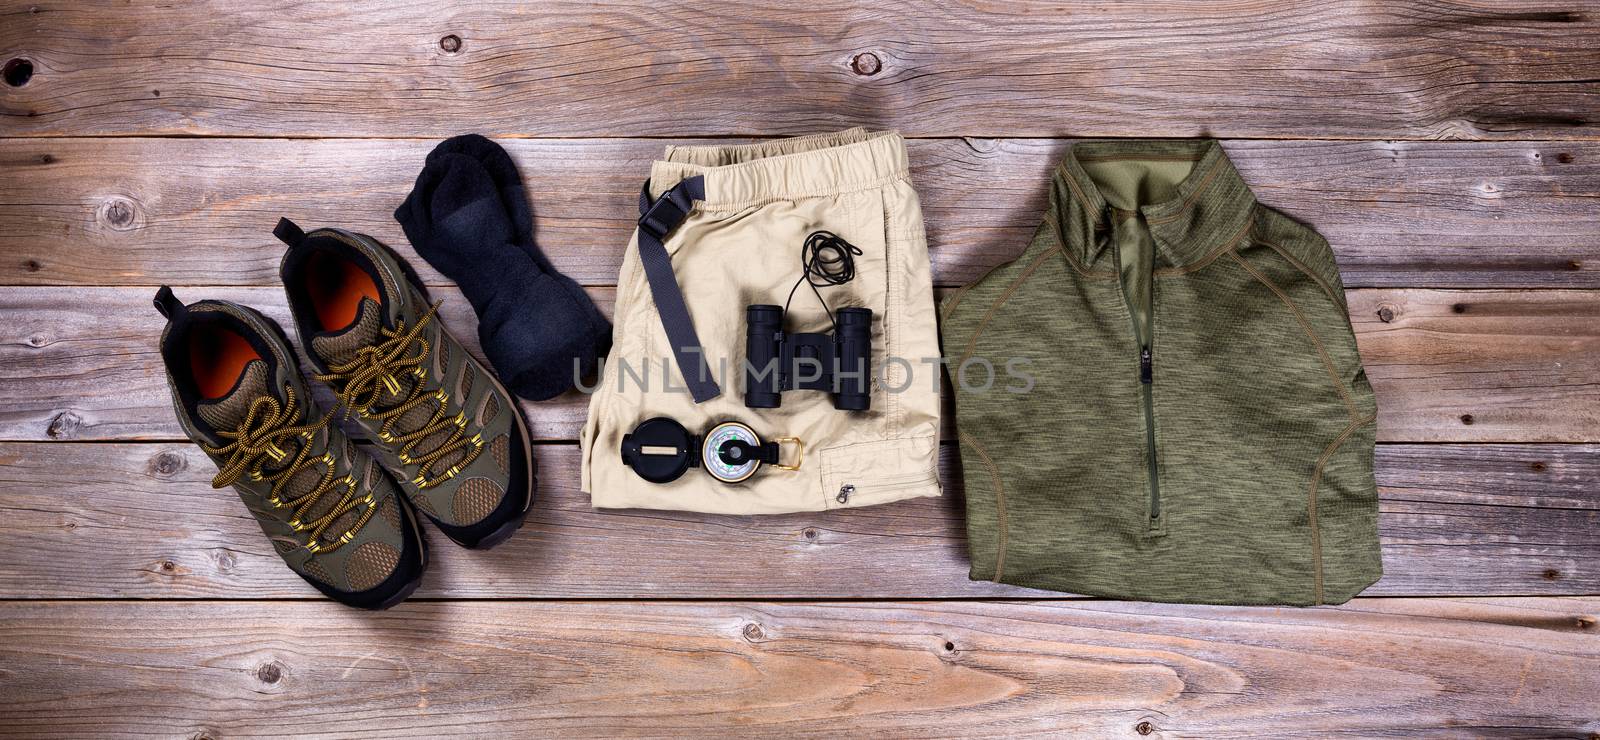 Top view of hiking gear to include hiking shoes, shorts, shirt, compass, socks and binoculars on rustic wooden boards